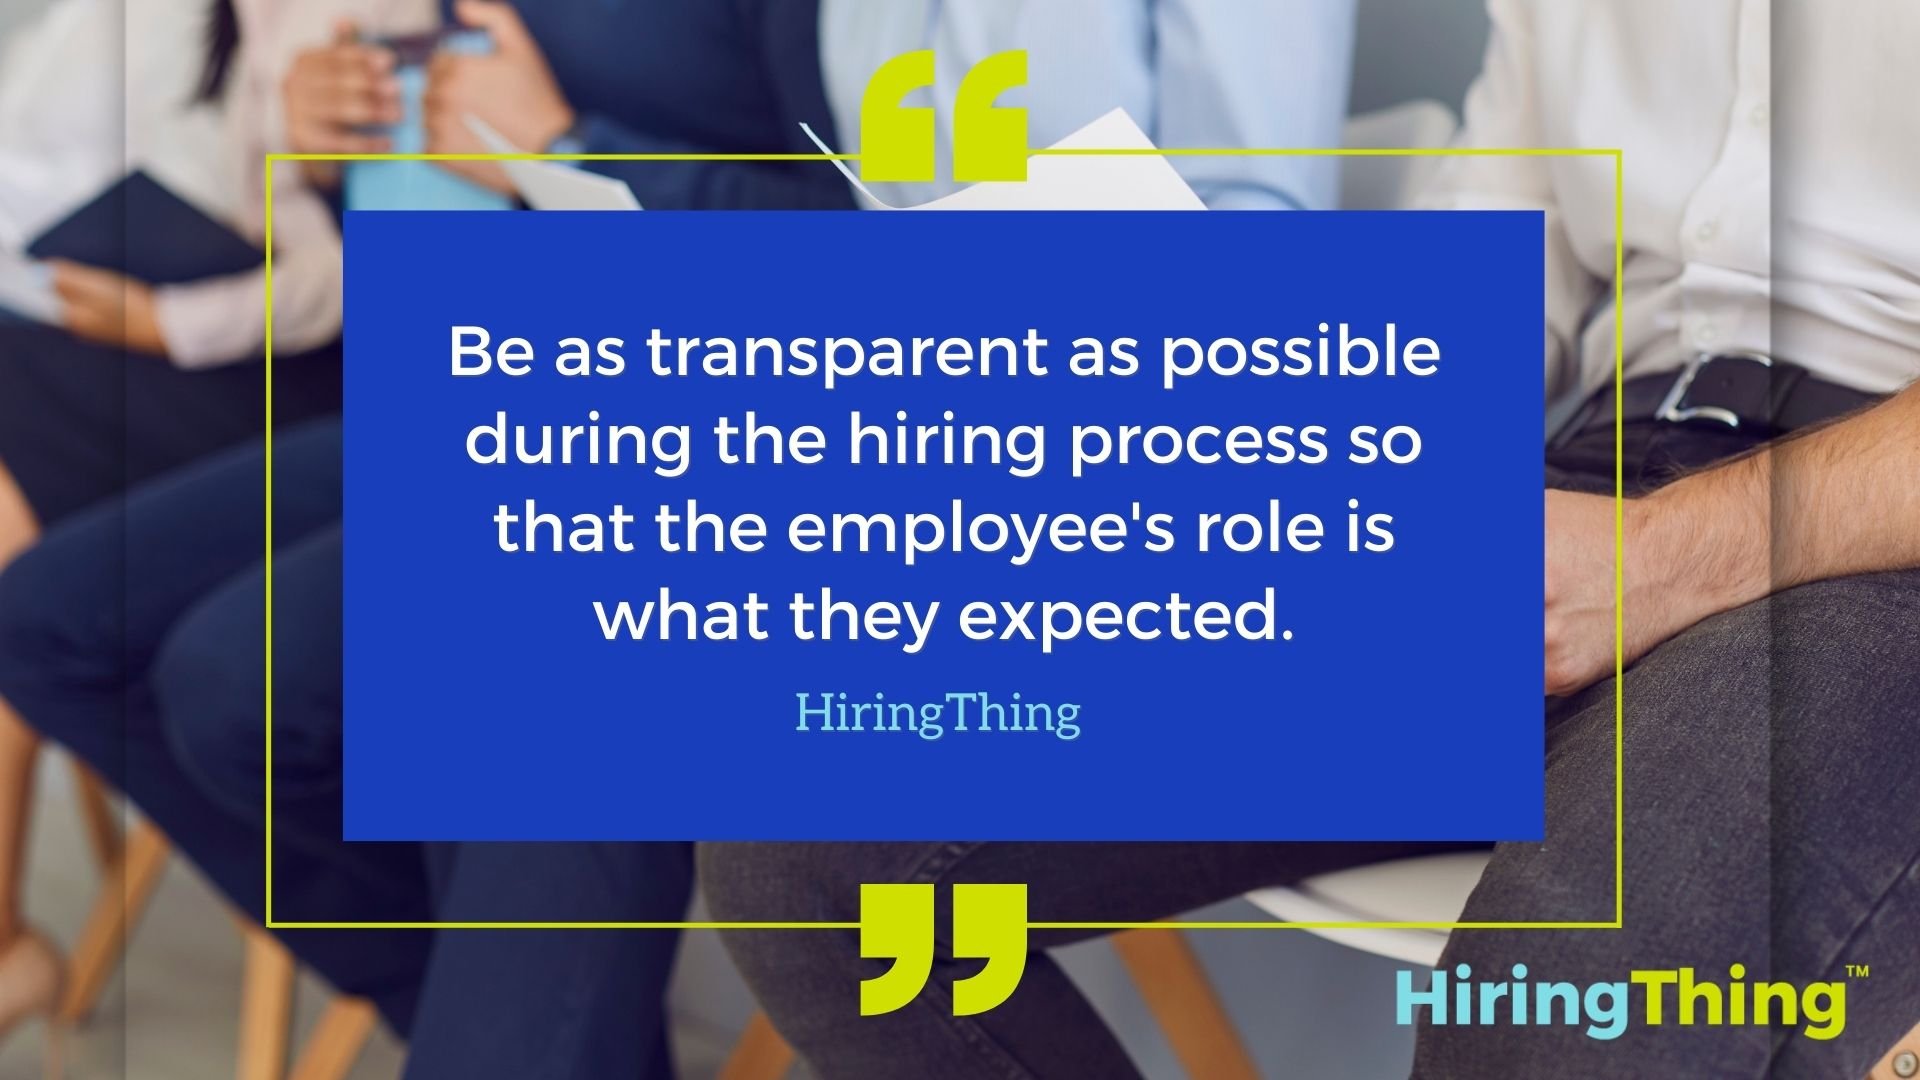 Be as transparent as possible during the hiring process so the employee's role is what they expected.